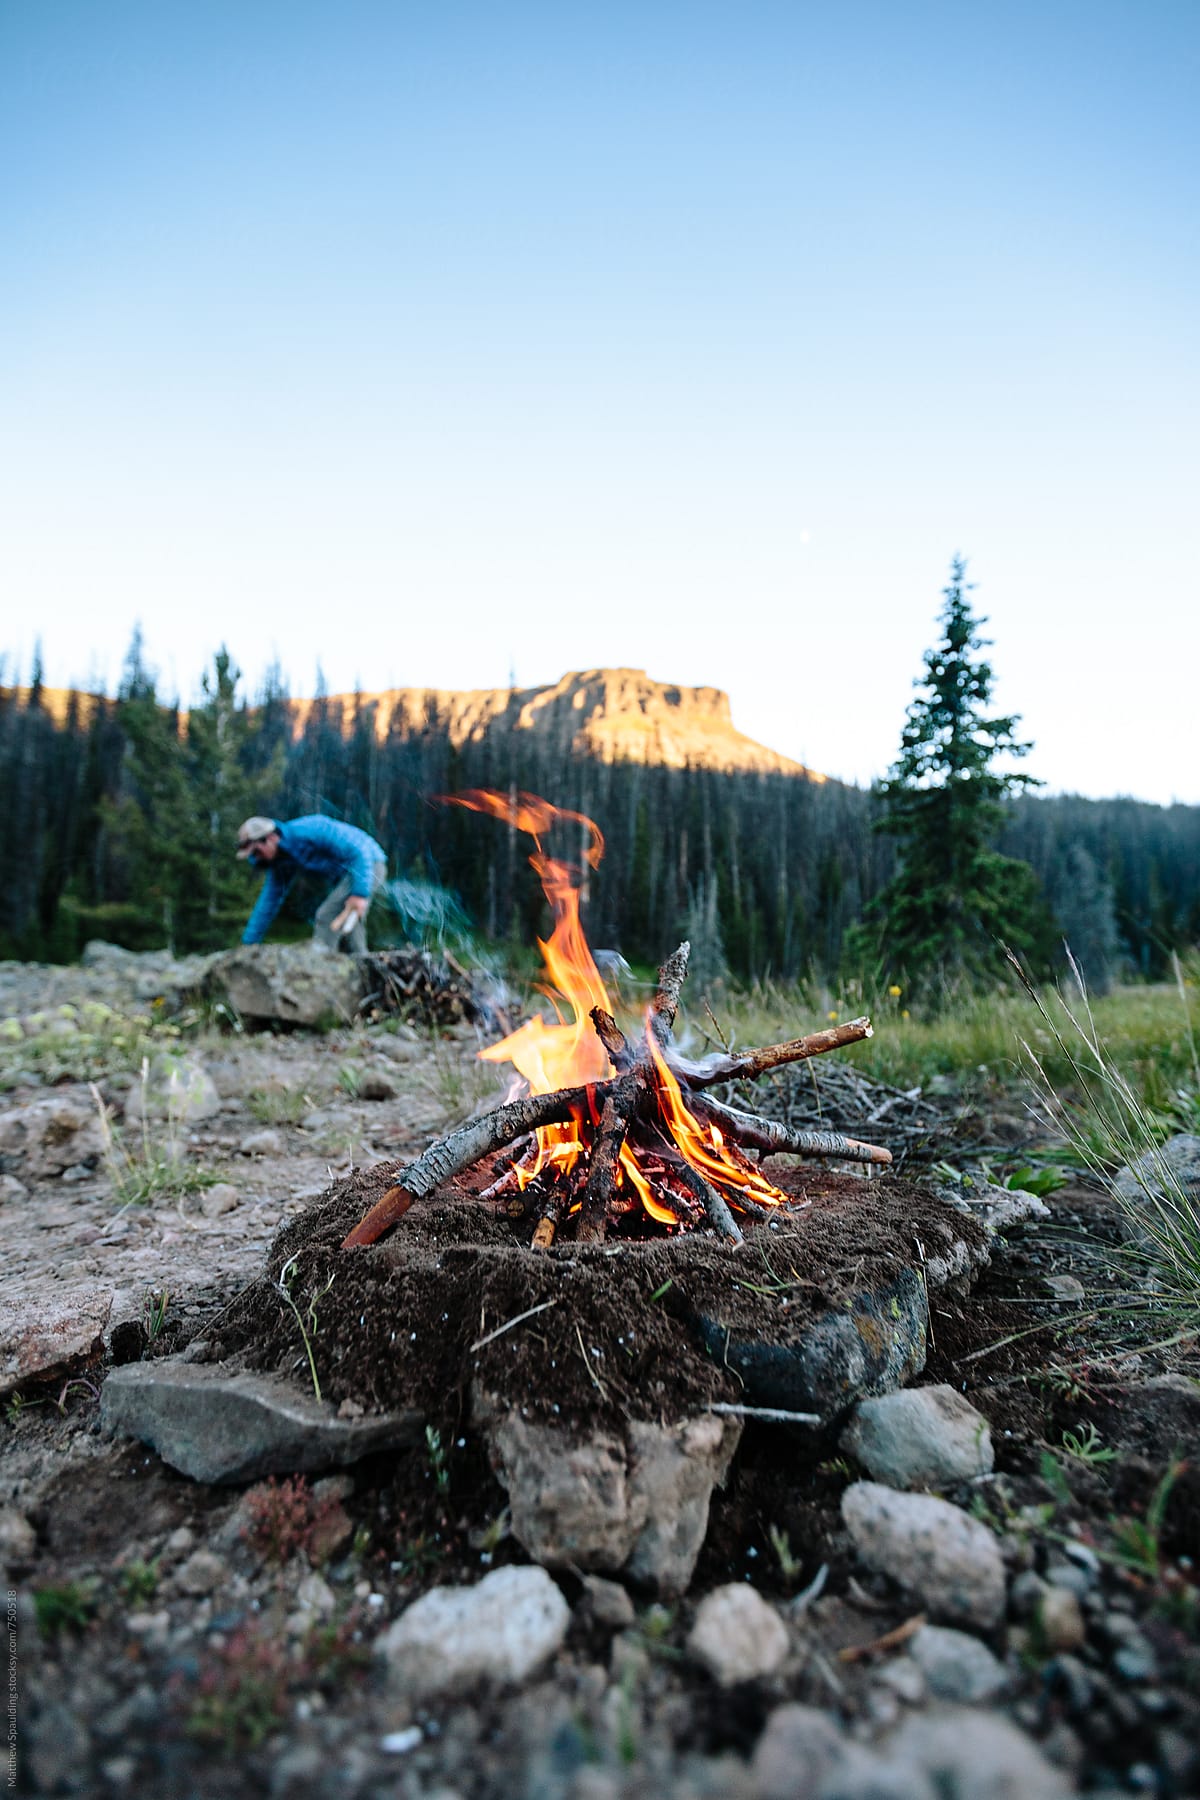 Man gathering wood and assembling small fire for camping